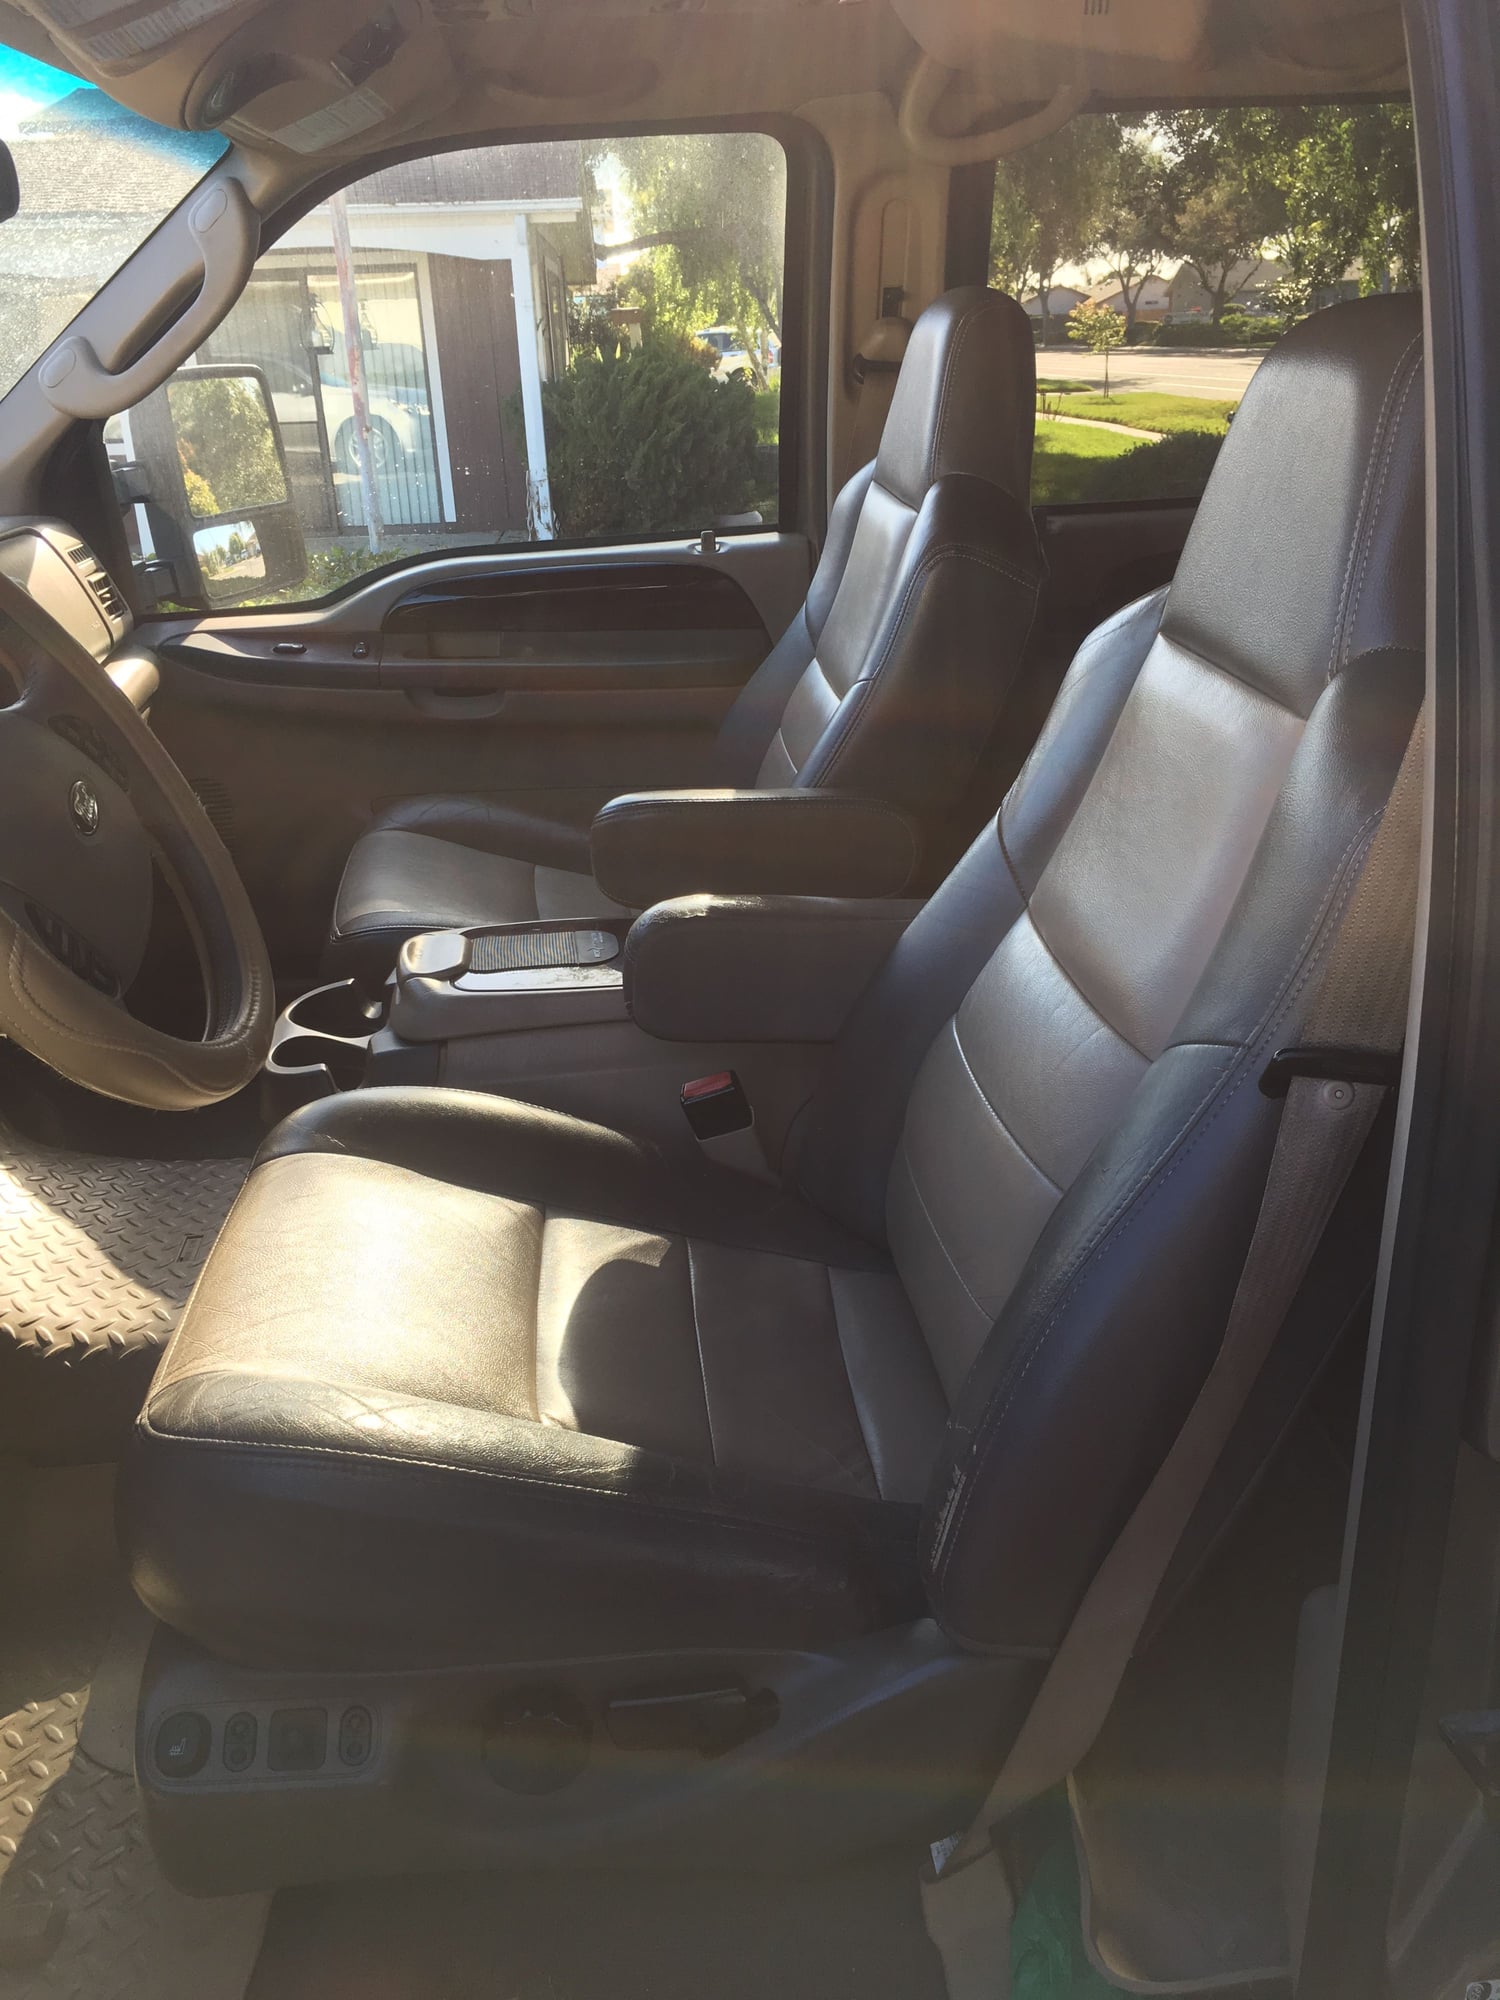 2004 Ford Excursion - 2004 Excursion Limited Diesel 150,000 miles - Used - VIN 1FMSU45PX4ED76669 - 140,000 Miles - 8 cyl - 4WD - Automatic - SUV - Brown - Lompoc, CA 93436, United States